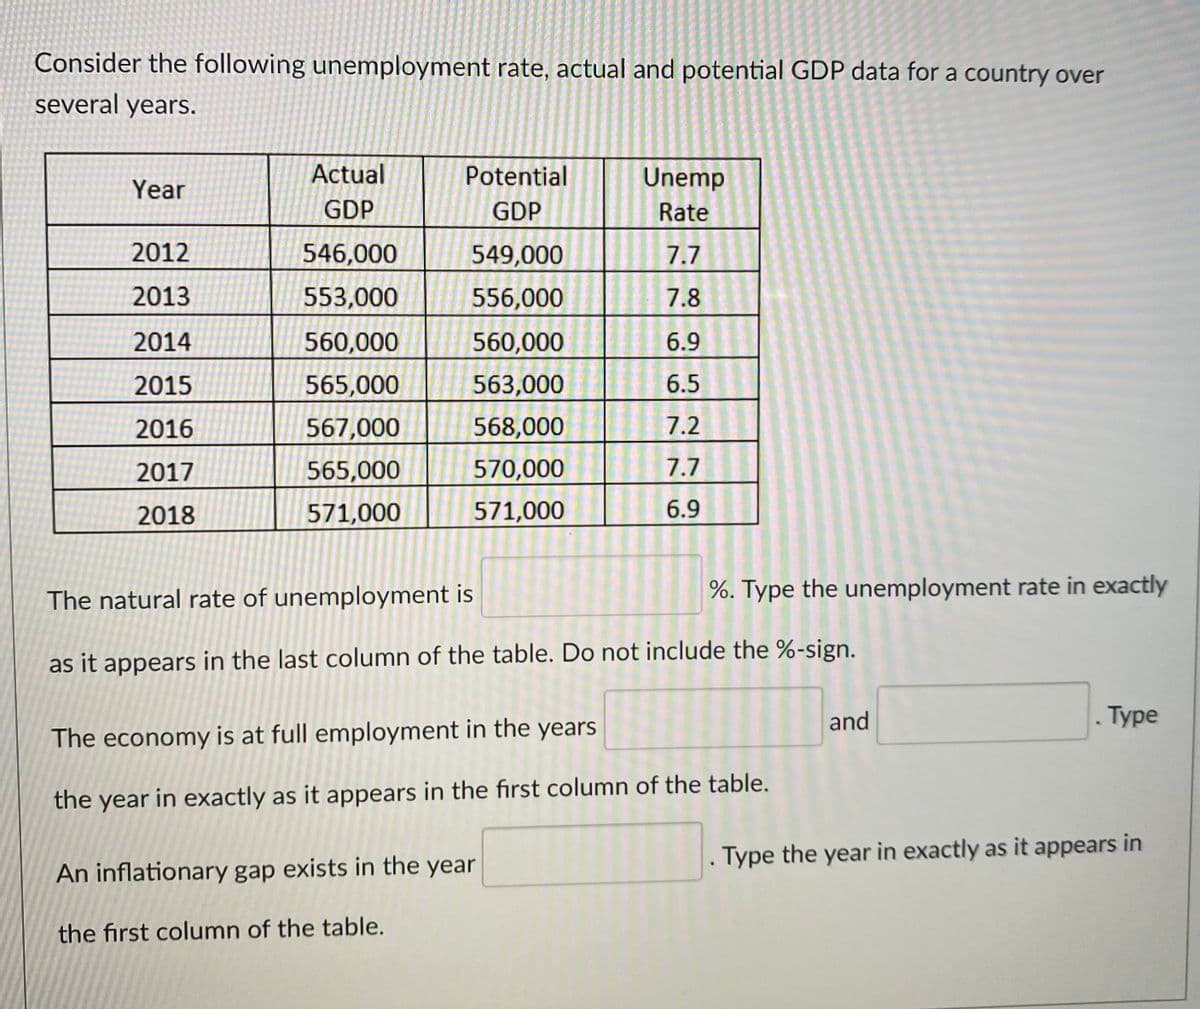 Consider the following unemployment rate, actual and potential GDP data for a country over
several years.
Actual
Potential
Unemp
Rate
Year
GDP
GDP
2012
546,000
549,000
7.7
2013
553,000
556,000
7.8
2014
560,000
560,000
6.9
2015
565,000
563,000
6.5
2016
567,000
568,000
7.2
2017
565,000
570,000
7.7
2018
571,000
571,000
6.9
The natural rate of unemployment is
%. Type the unemployment rate in exactly
as it appears in the last column of the table. Do not include the %-sign.
and
Type
The economy is at full employment in the years
the year in exactly as it appears in the first column of the table.
. Type the year in exactly as it appears in
An inflationary gap exists in the year
the first column of the table.
